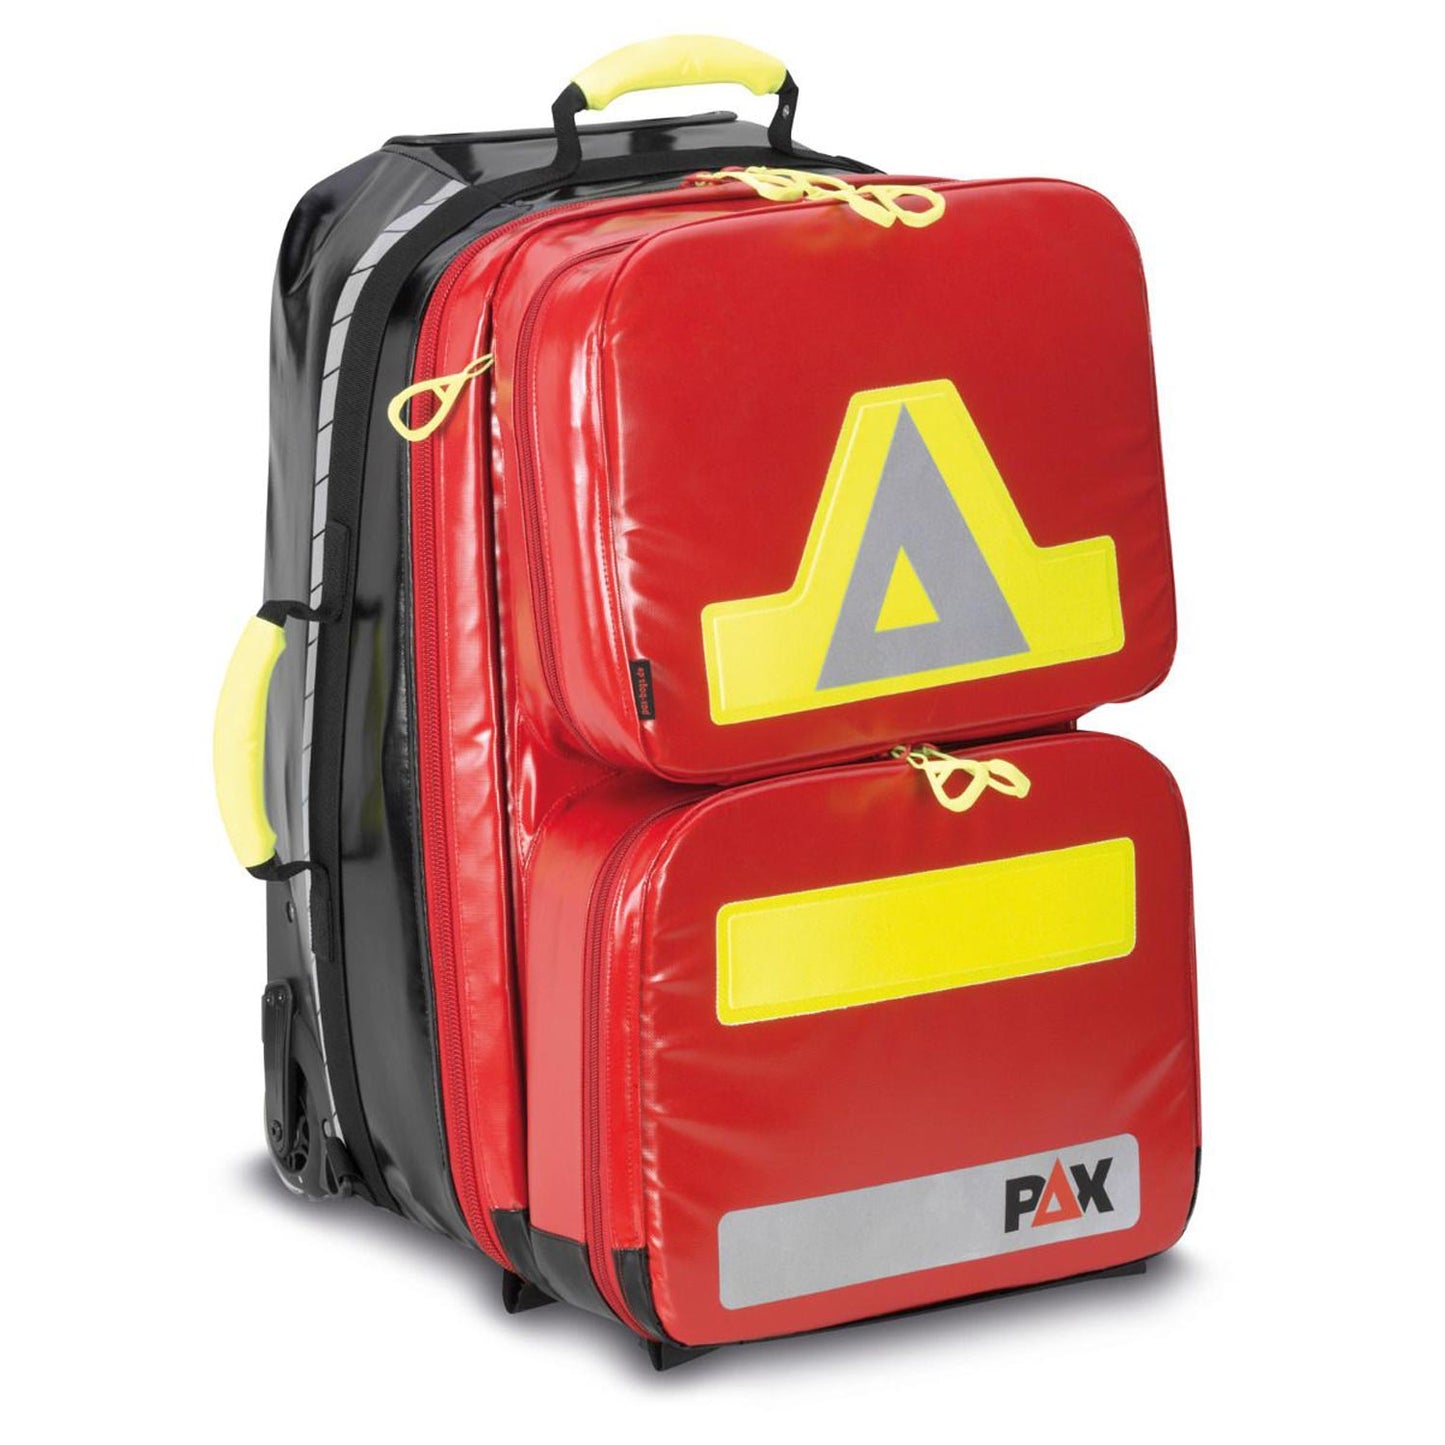 Pax Wasserkuppe L-Ft2 Trolley With A Capacity Of 84 Litres